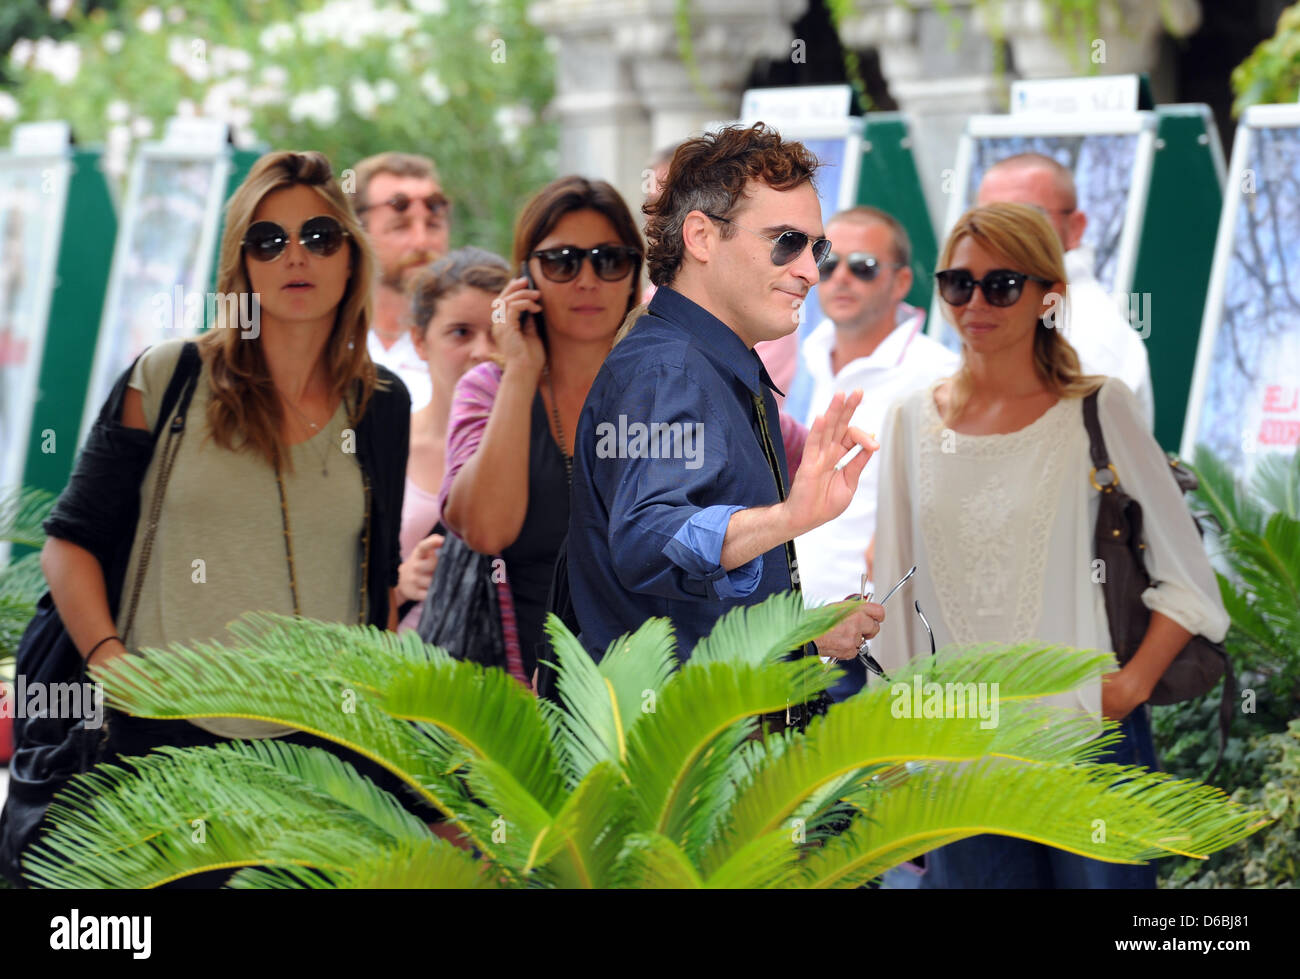 US actor Joaquin Phoenix arrives at hotel Excelsior to attend a photocall of the movie 'The Master' at the 69th Venice Film Festival in Venice, Italy, 01 September 2012. The movie is presented in the competition of the festival which runs from 29 August to 08 September. Photo: Jens Kalaene Stock Photo